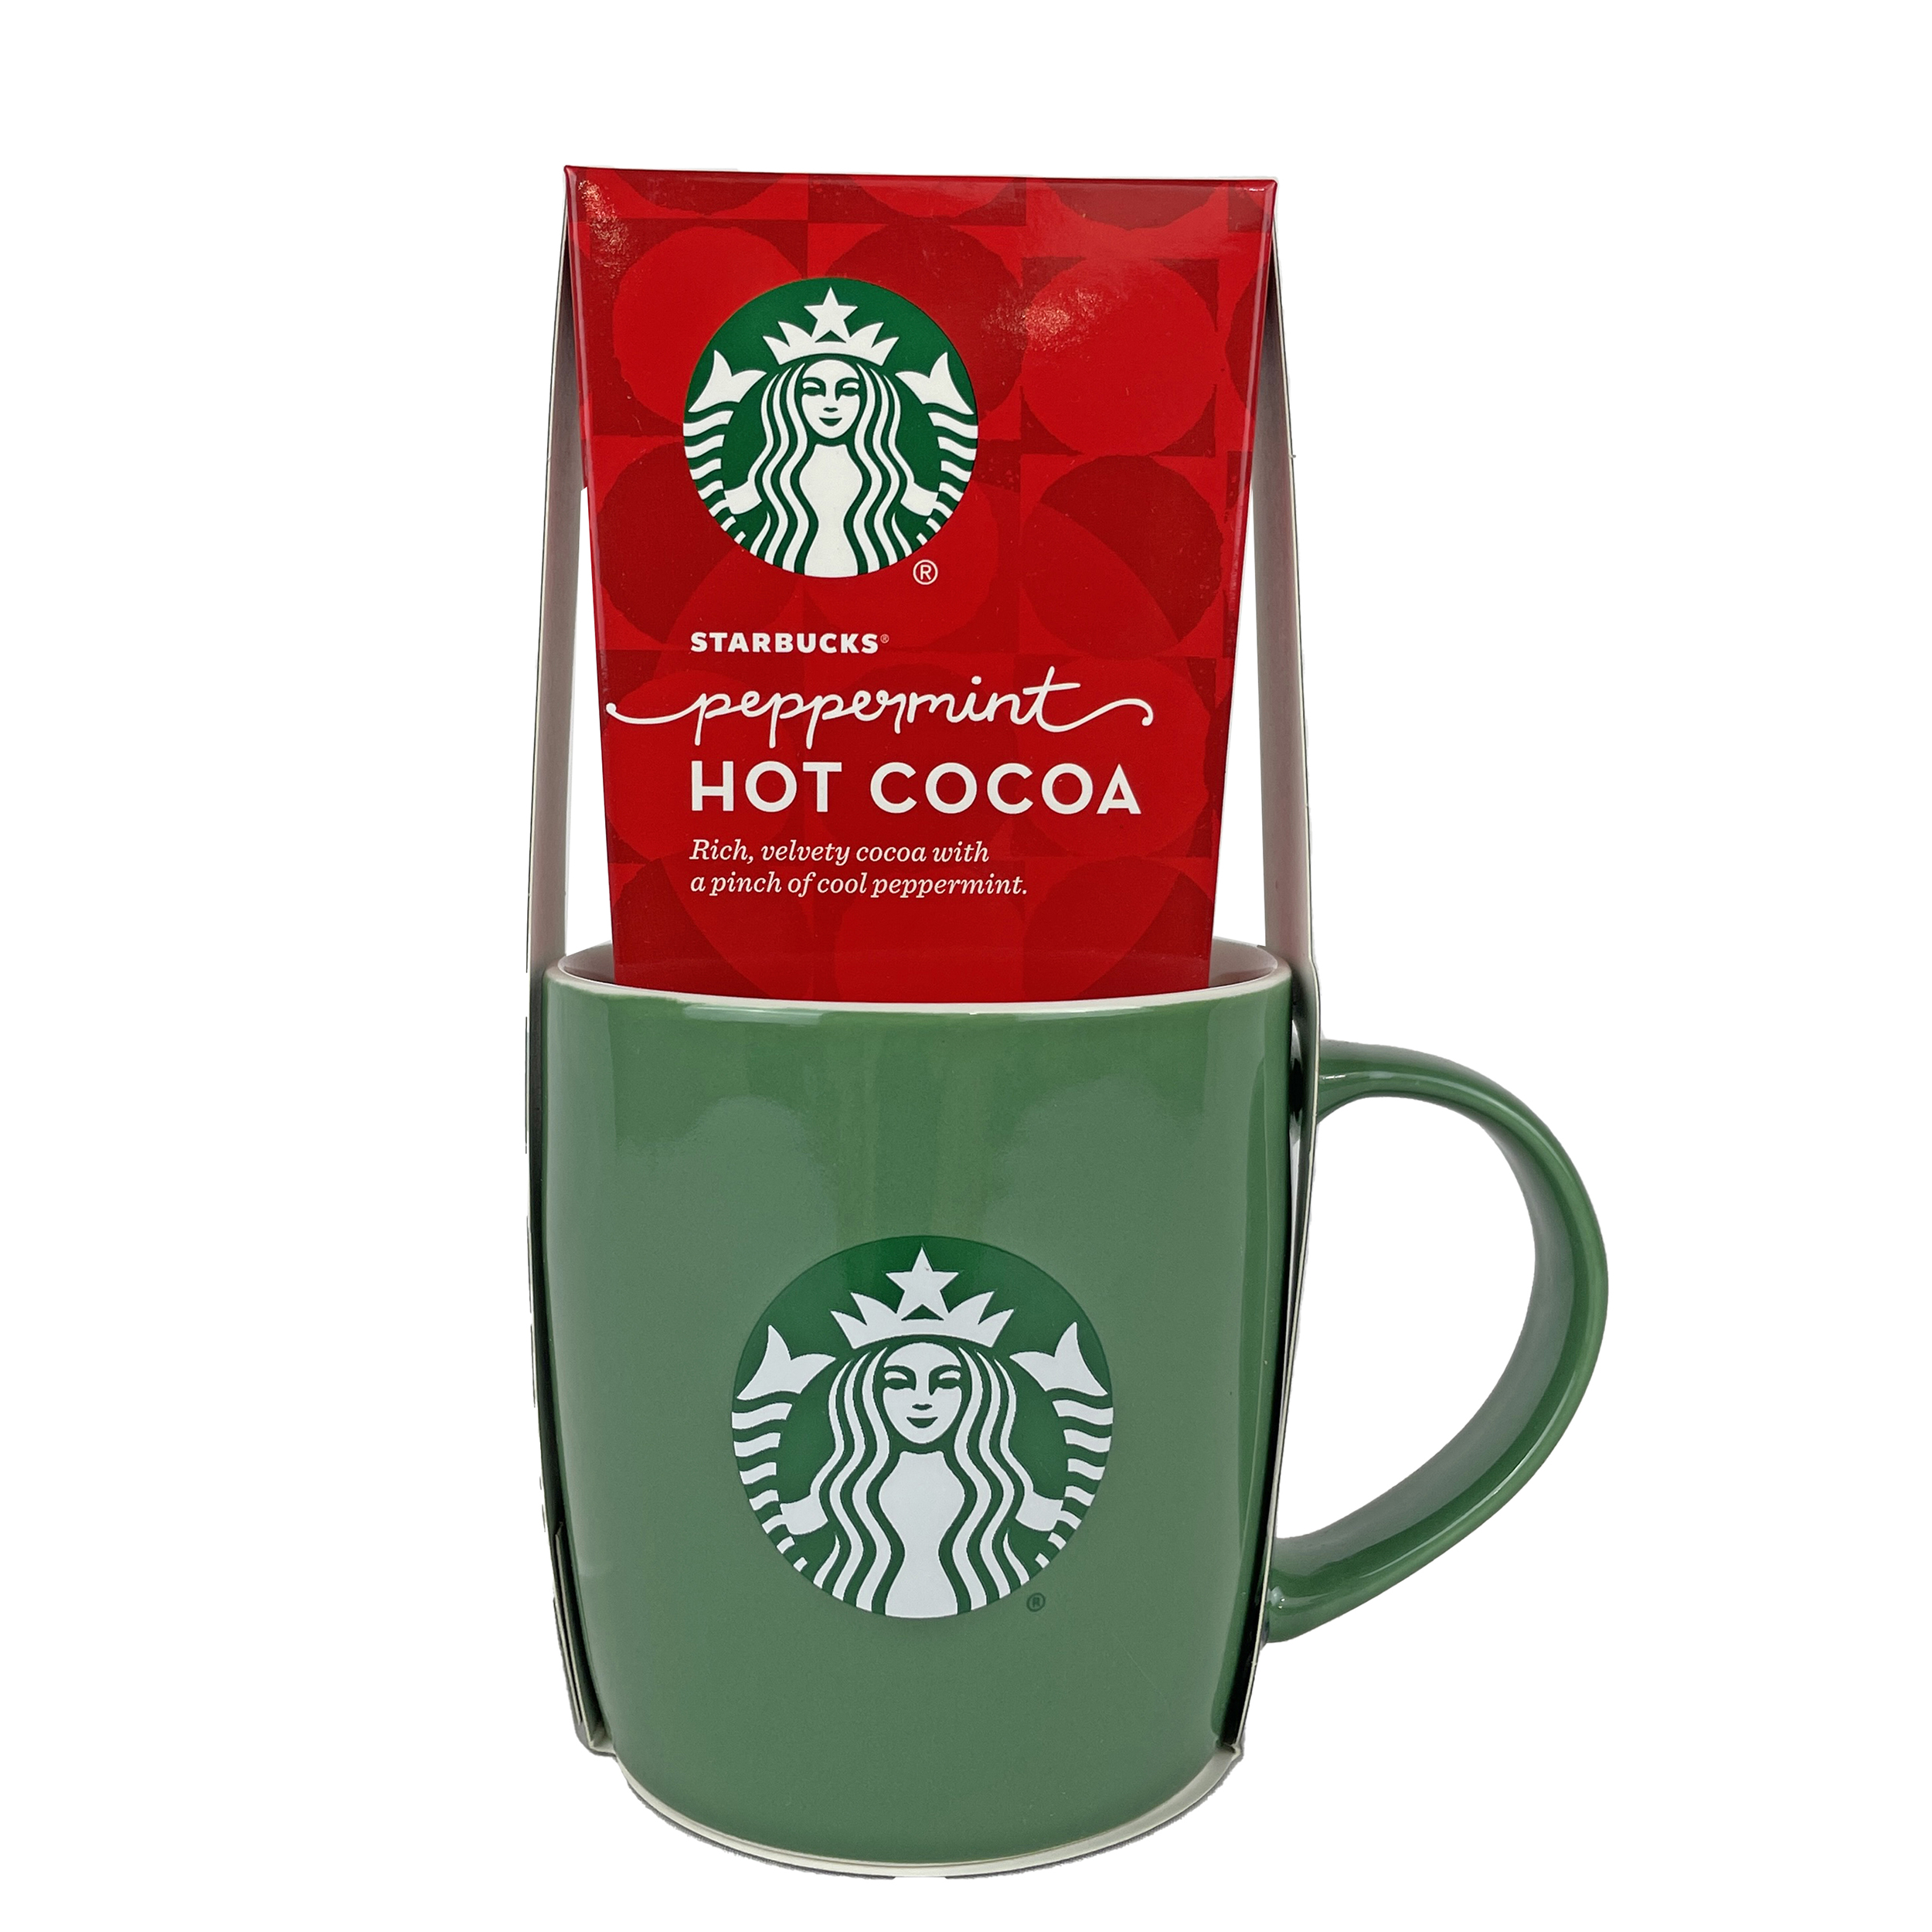 Starbucks Holiday Gift Pack - Ceramic mug and Starbucks Peppermint or Classic Hot Cocoa - image 1 of 2